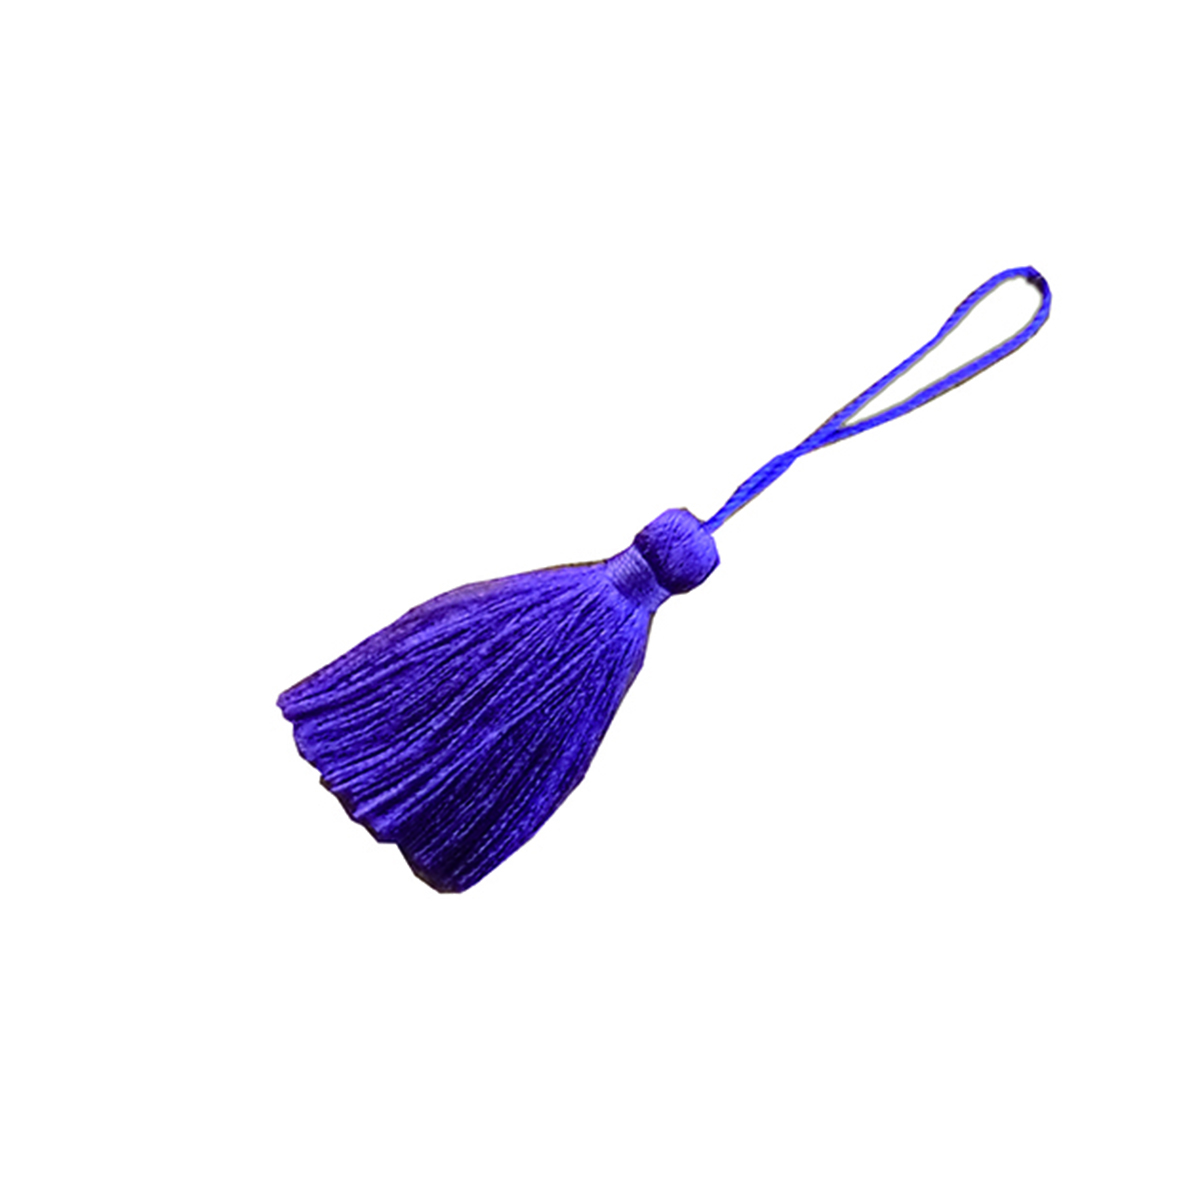 Pack of 10 small purple tassels, made in Japan, Chikyuya, hanging decoration, accessory, auspicious decoration